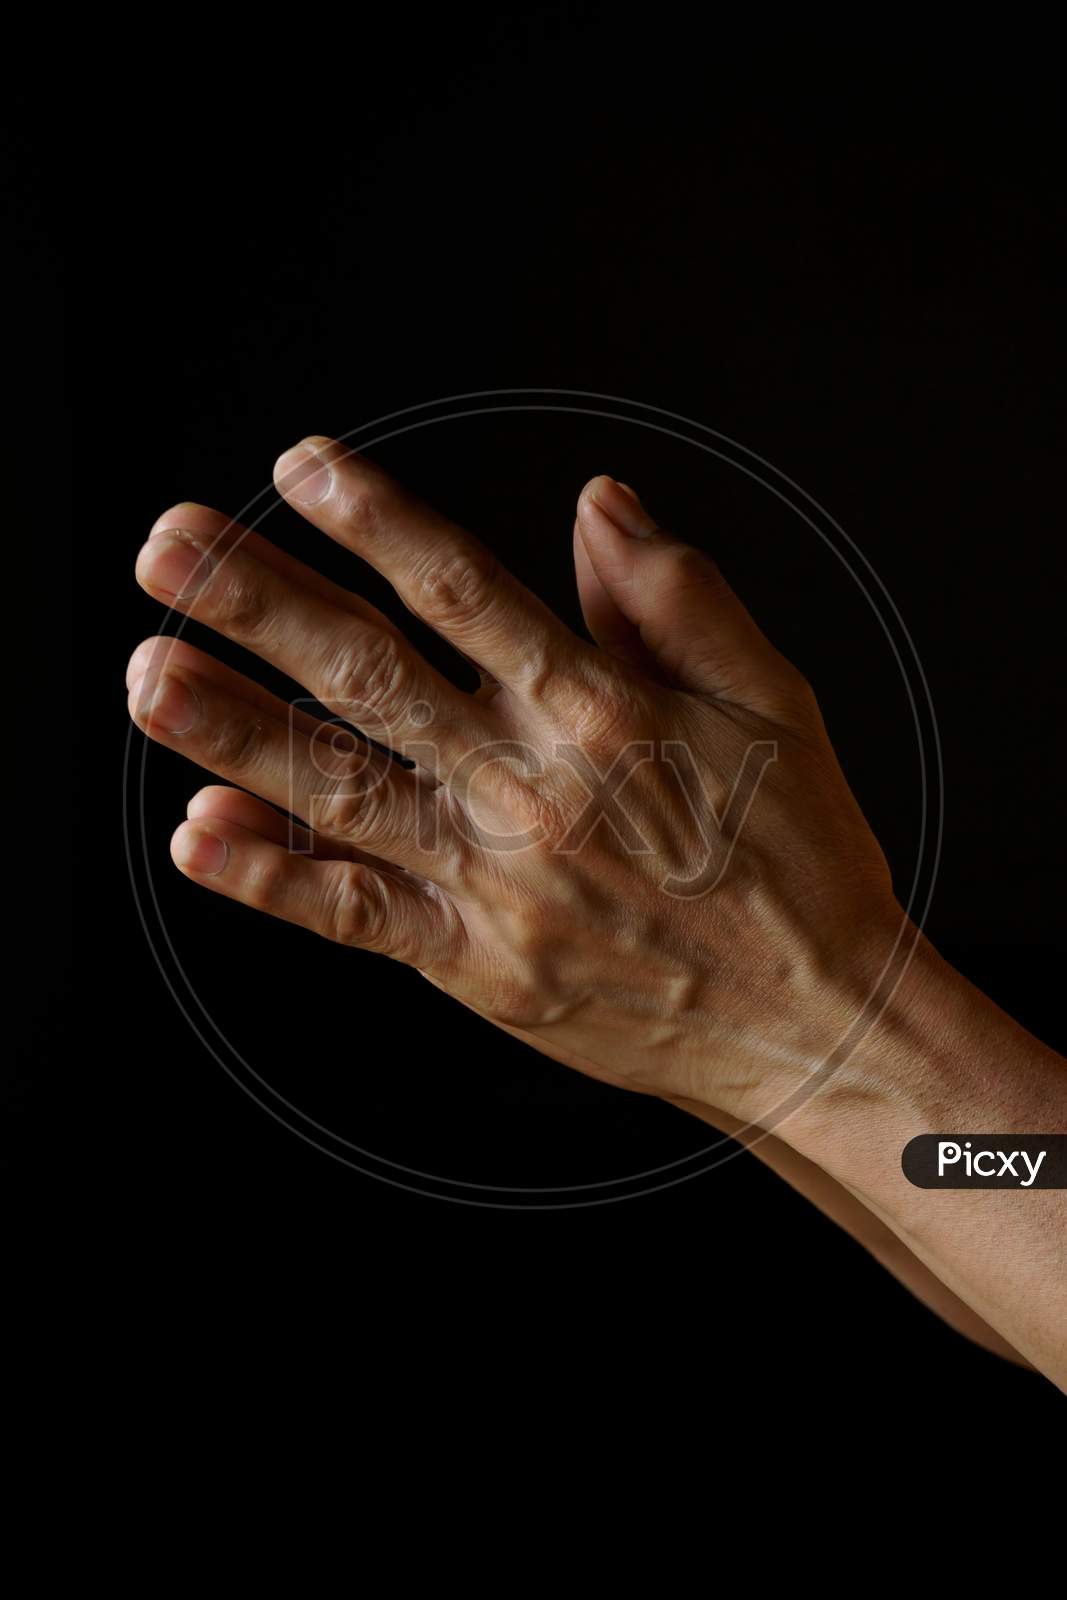 Praying Hands Of An Old Indian Catholic Woman Isolated On A Plain Black Background.